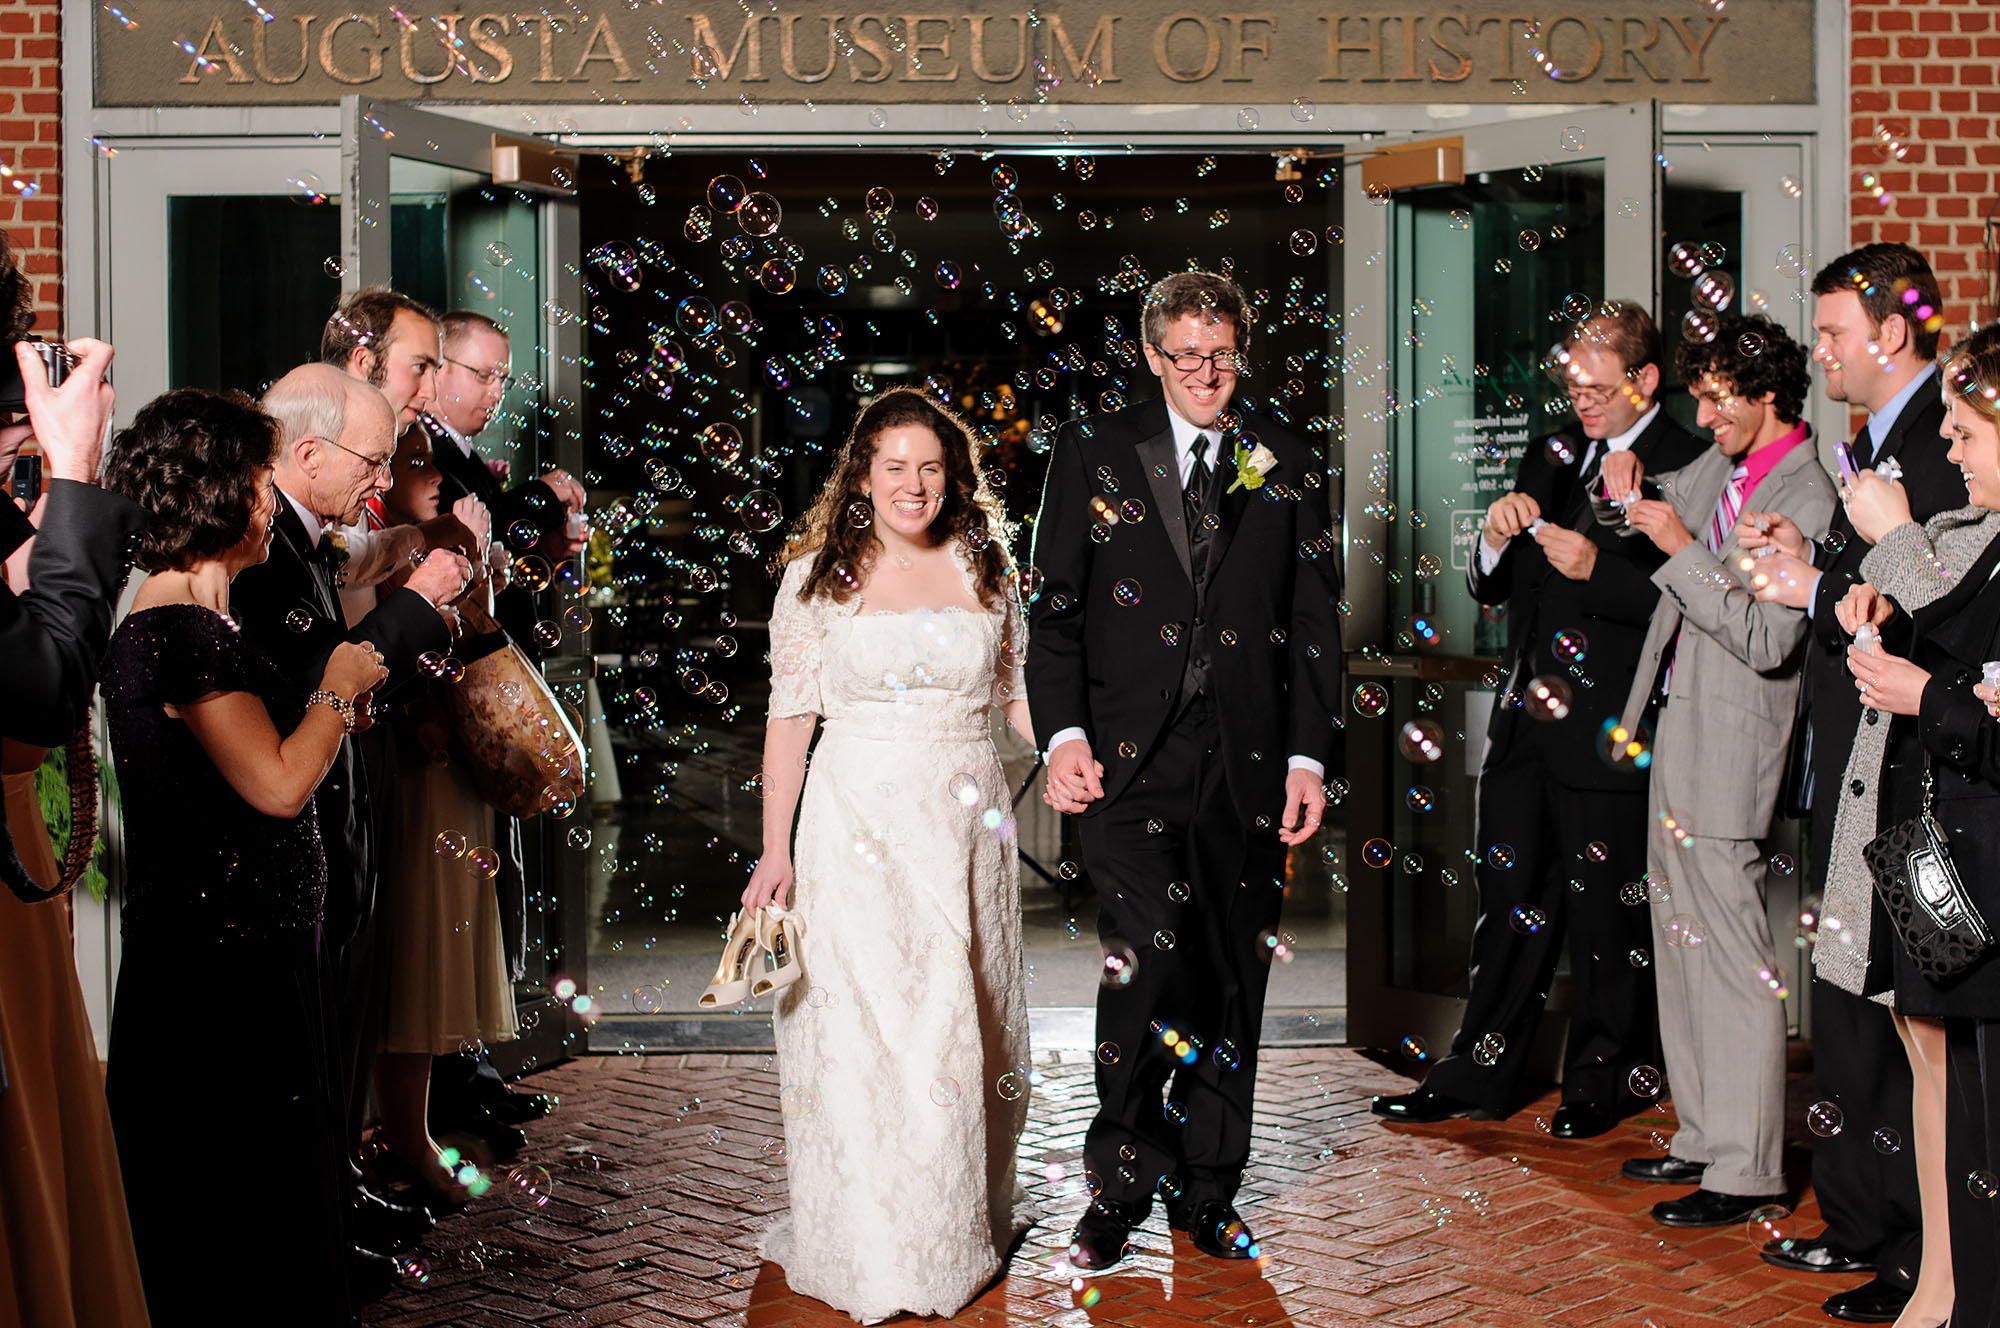 Patrick and Meredith | Wedding at Christ Church Presbyterian | Reception at Augusta Museum of History